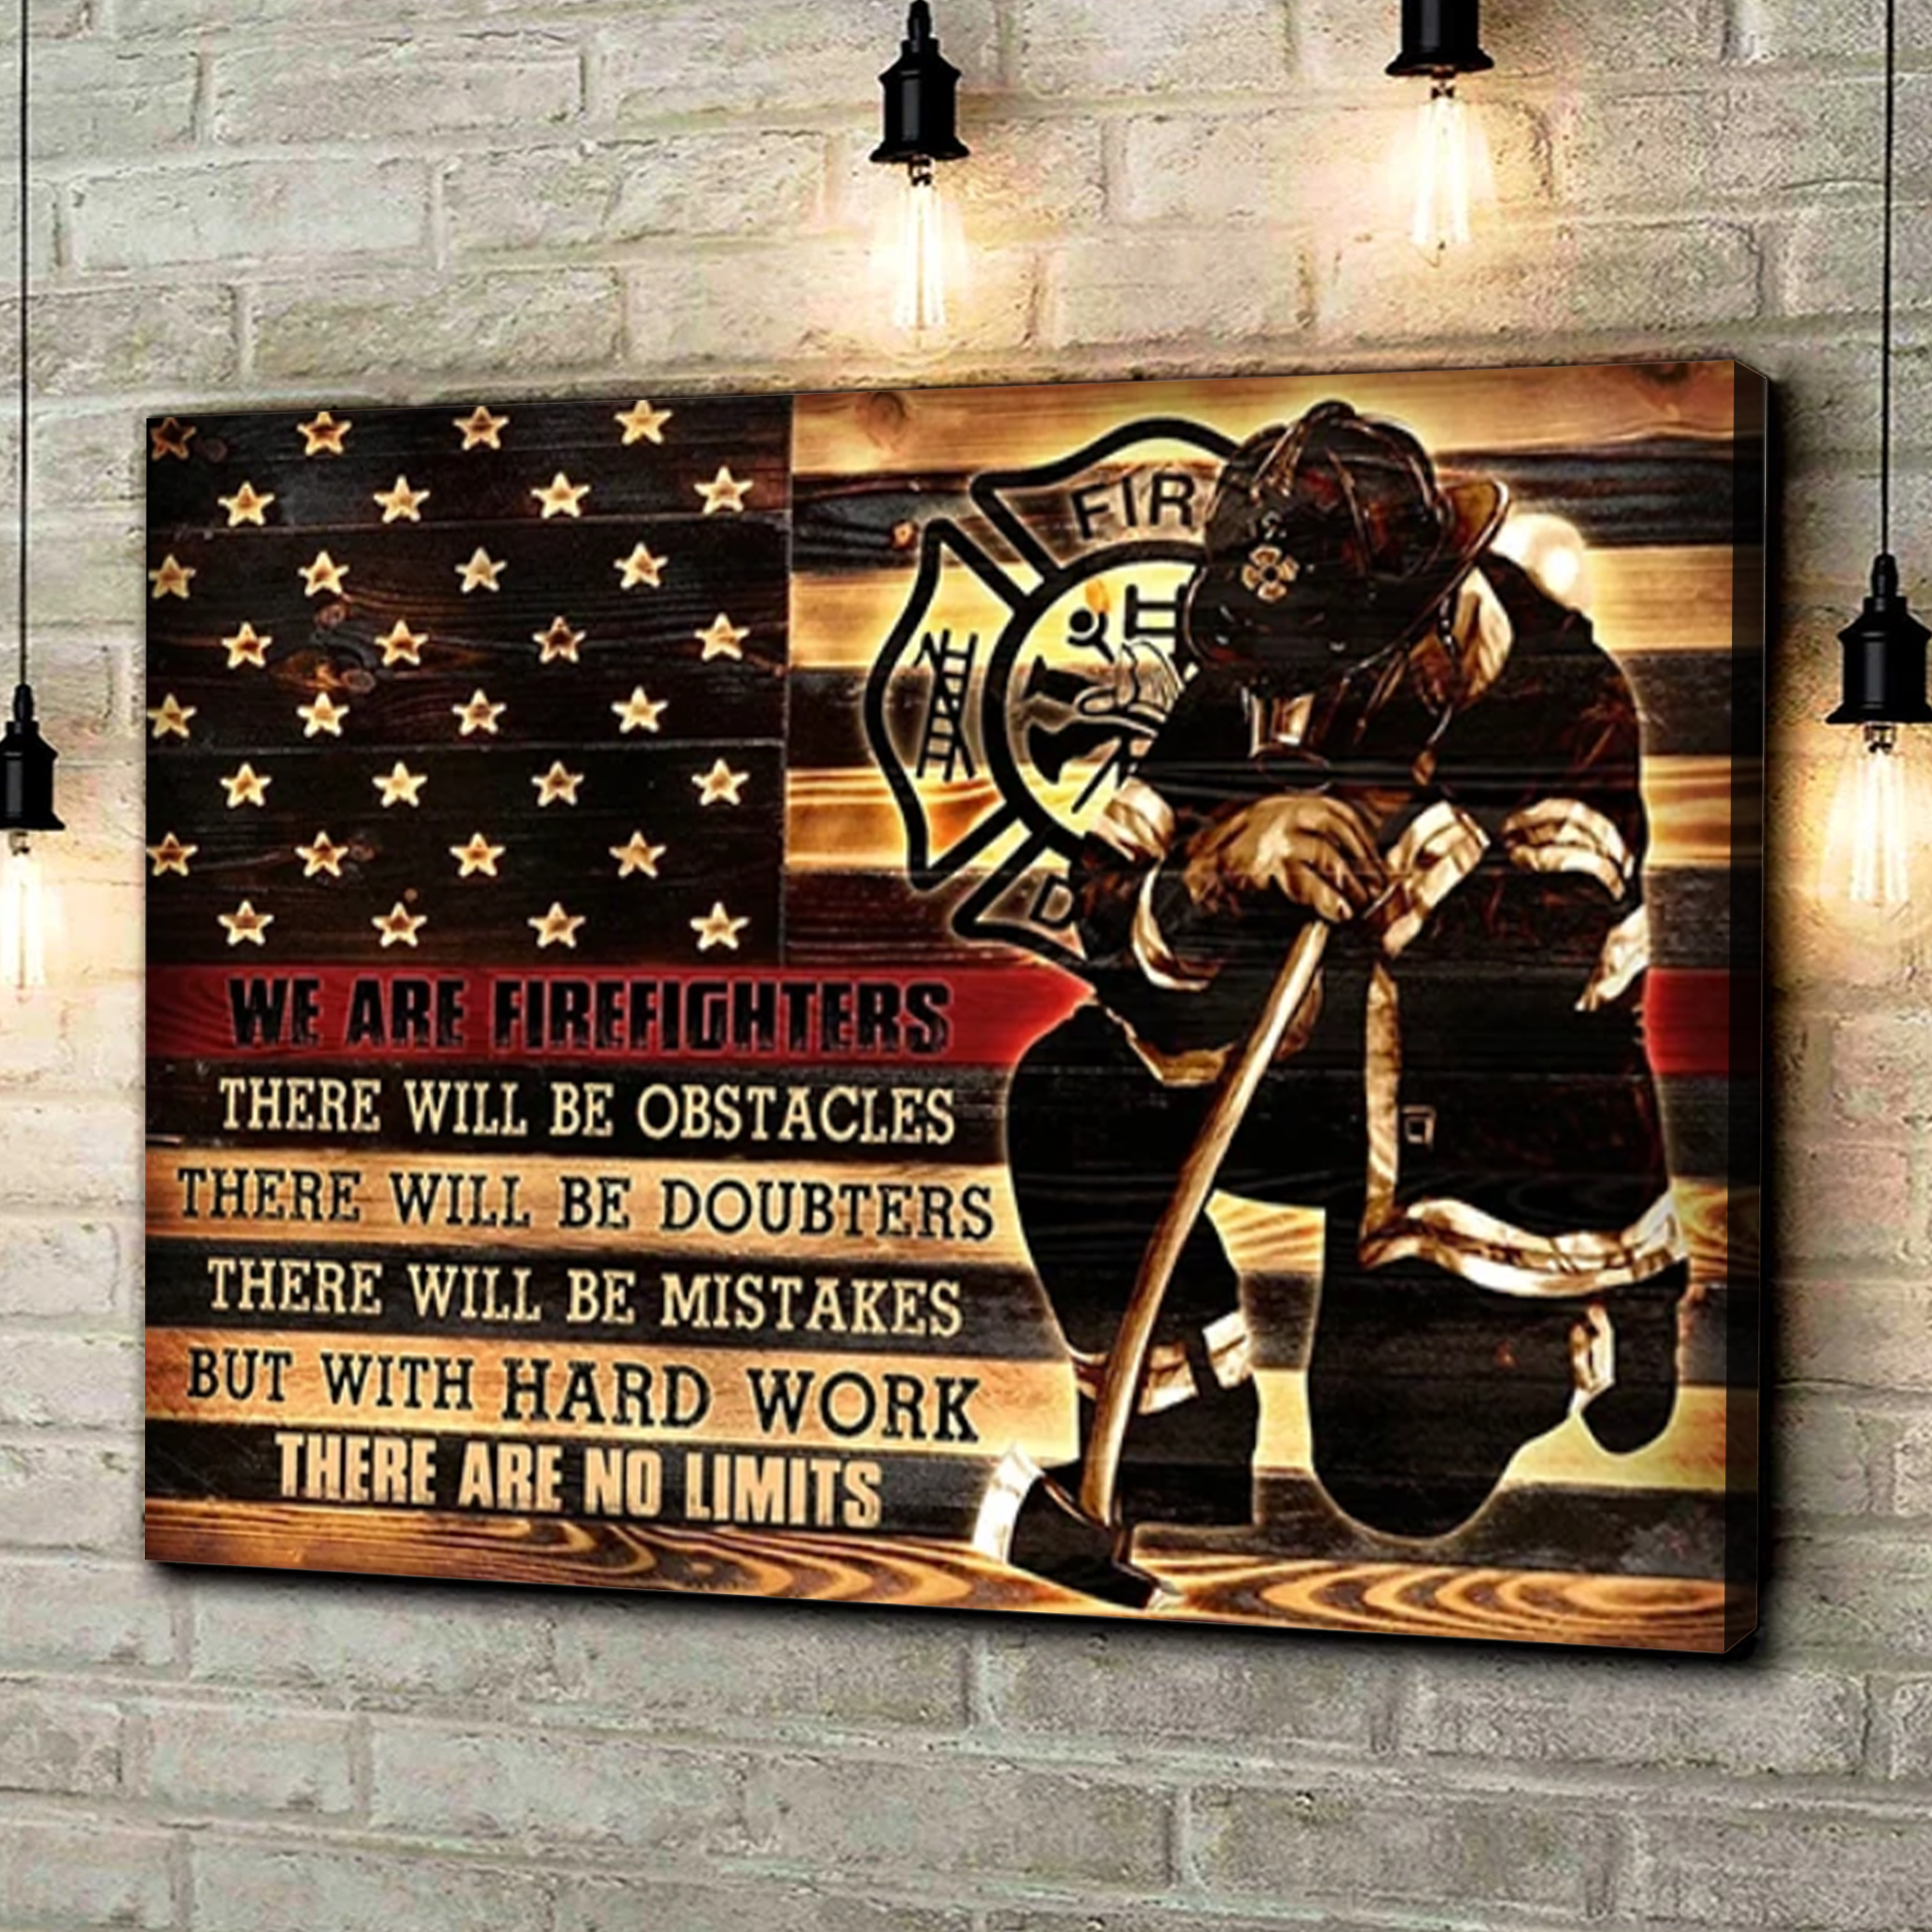 Firefighter Canvas – We Are Firefighters There Will Be Obstacles